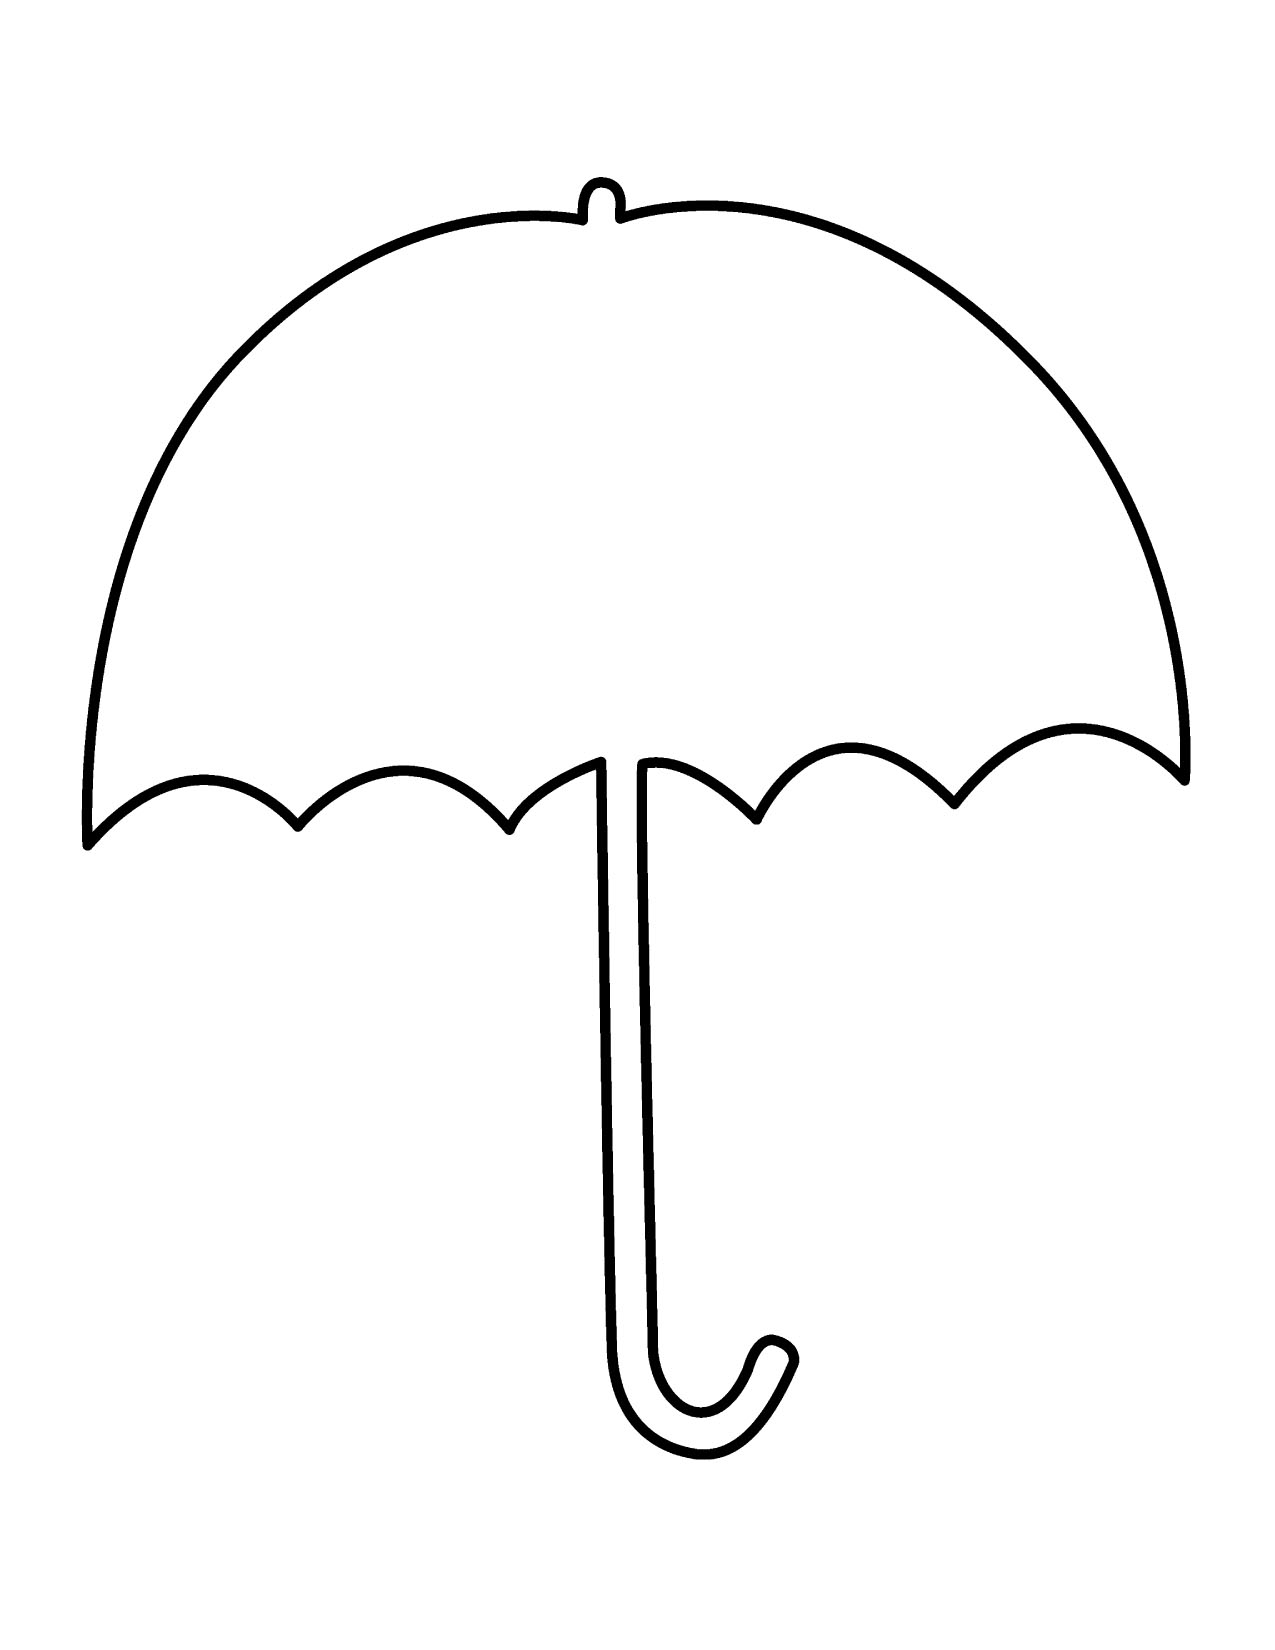 umbrella-and-raindrop-template-click-on-the-picture-to-download-the